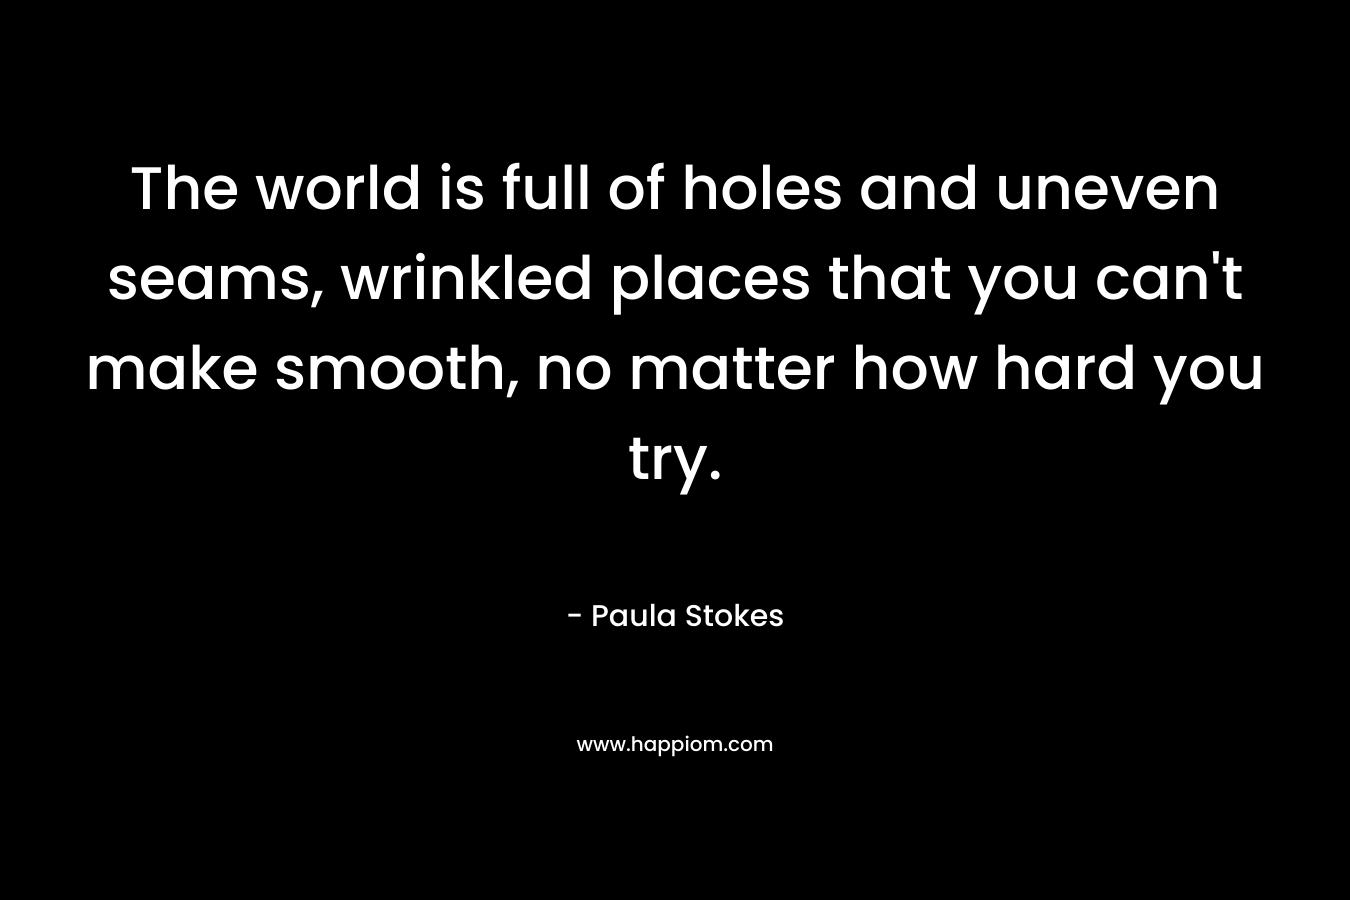 The world is full of holes and uneven seams, wrinkled places that you can’t make smooth, no matter how hard you try. – Paula Stokes